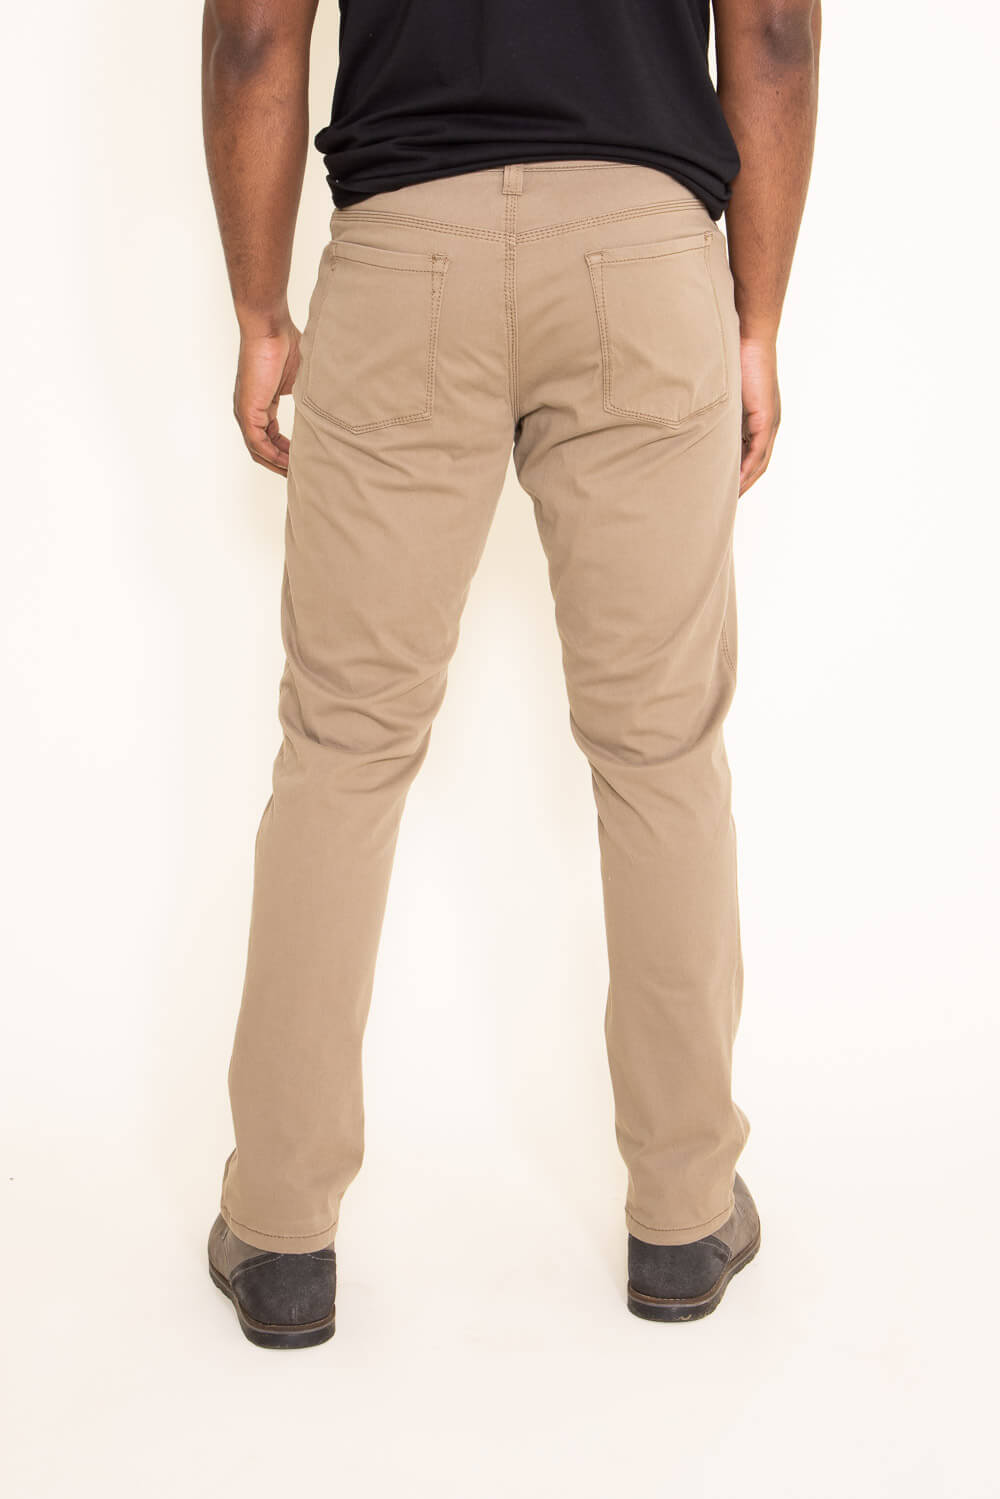 Union Five Pocket Comfort Twill Pants for Men in Brown